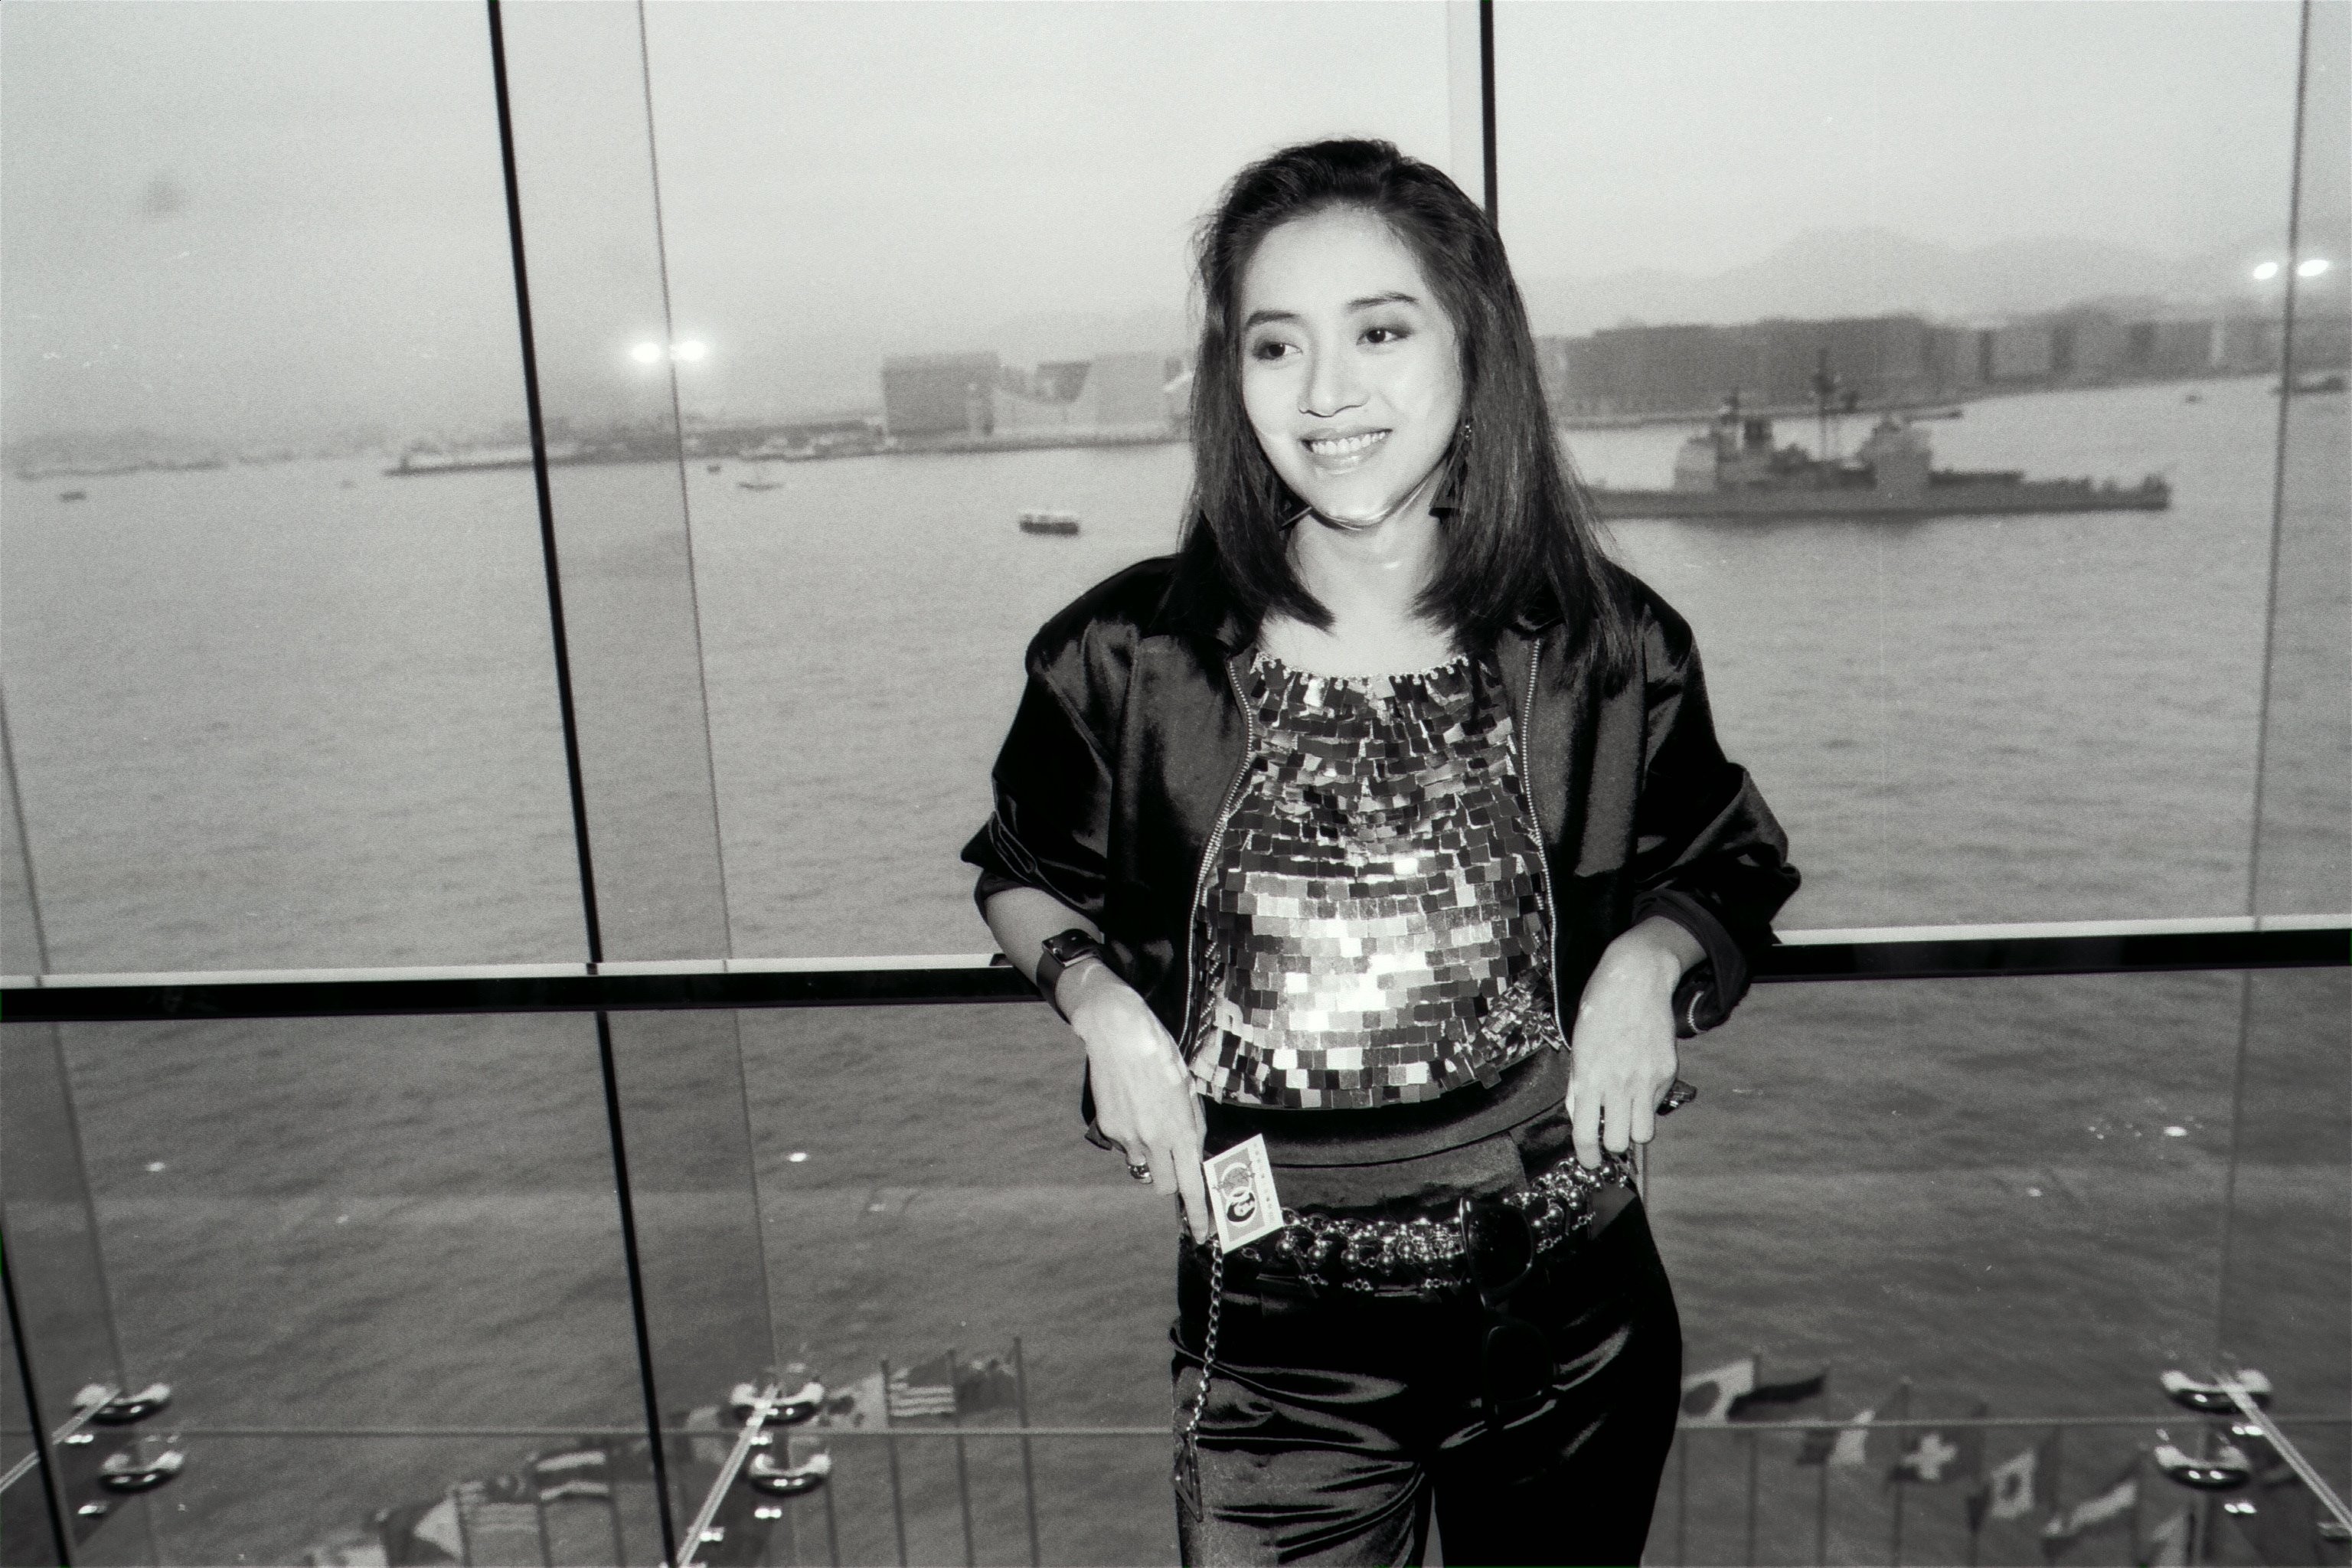 The Canto-pop diva’s death at 40 shocked fans in Hong Kong and across Asia, but she left behind a trove of albums, many of which are sought-after by collectors